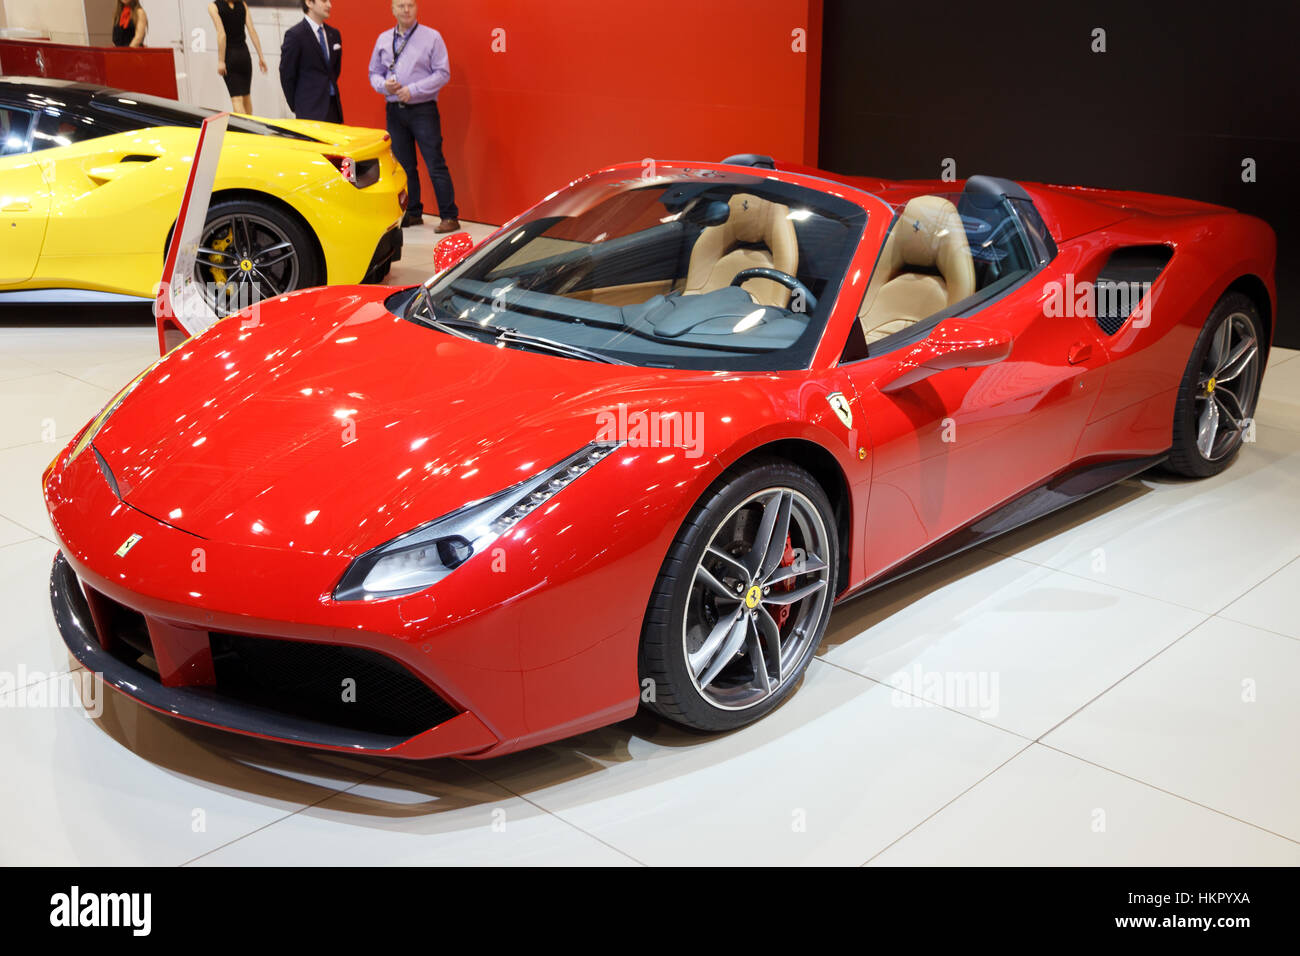 BRUSSELS - JAN 12, 2016: Red Ferrari 488 Spider sports car shown at the Brussels Motor Show. Stock Photo